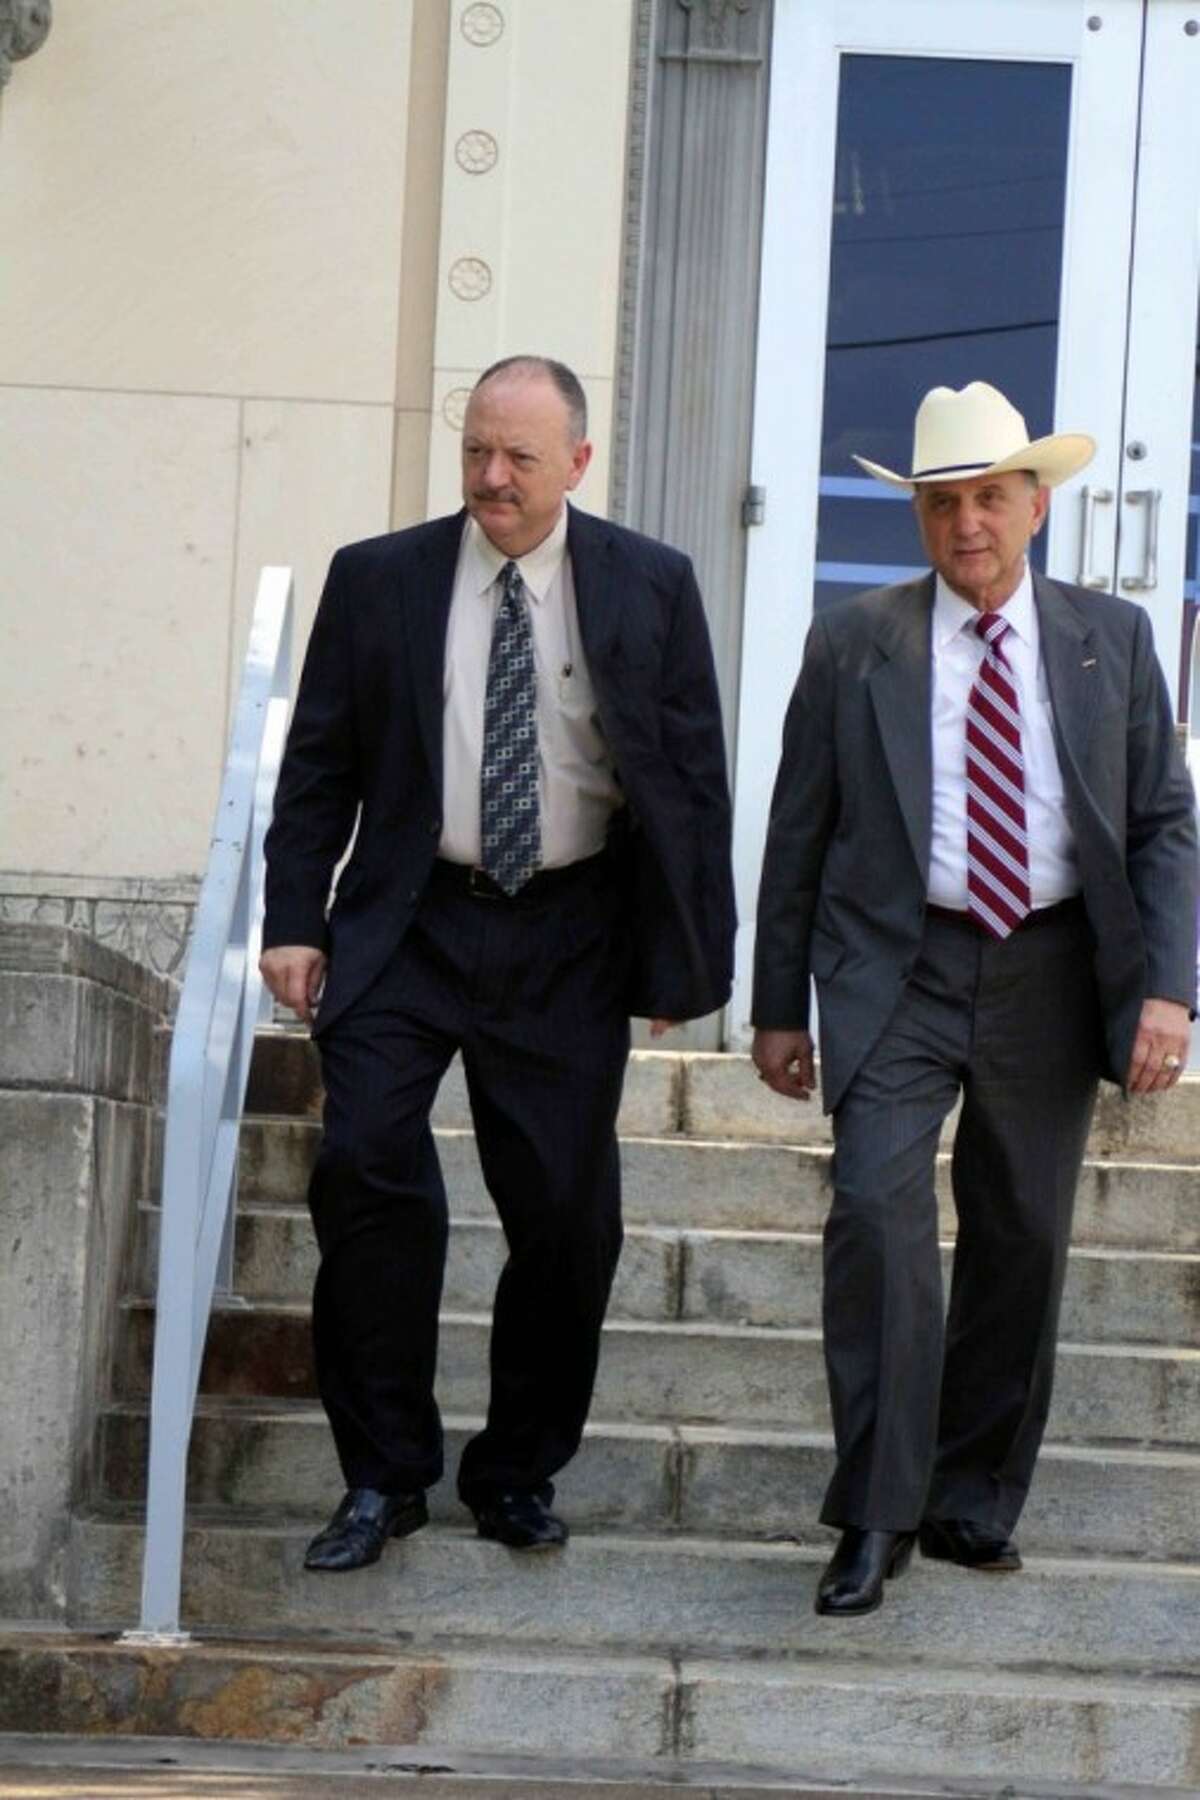 Harry Kelley (left) leaves the federal court building in Beaumont following his sentencing hearing. He is accompanied by his attorney, Jack Zimmermann. Kelley had initially left the building but returned to face media at the urging of his attorney. Kelley plans to appeal his conviction for two counts of mail fraud and one count of possession of stolen ammunition.